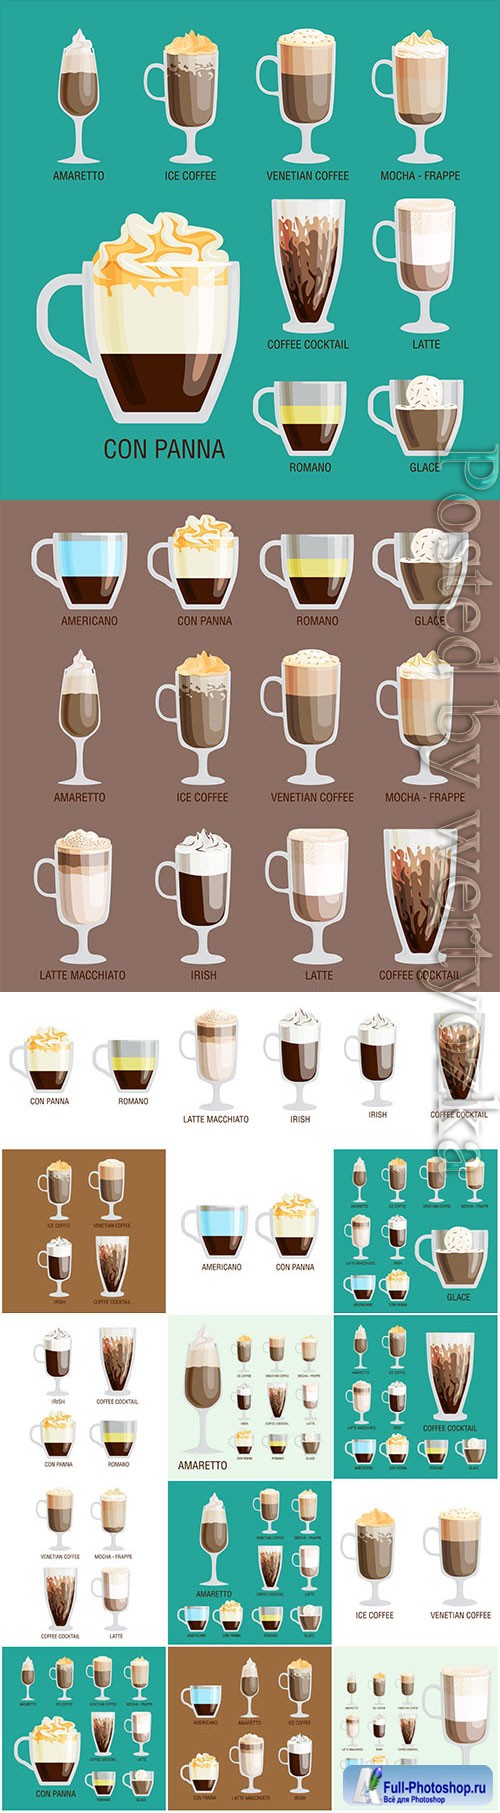 Coffee and coffee drinks in assortment in vector